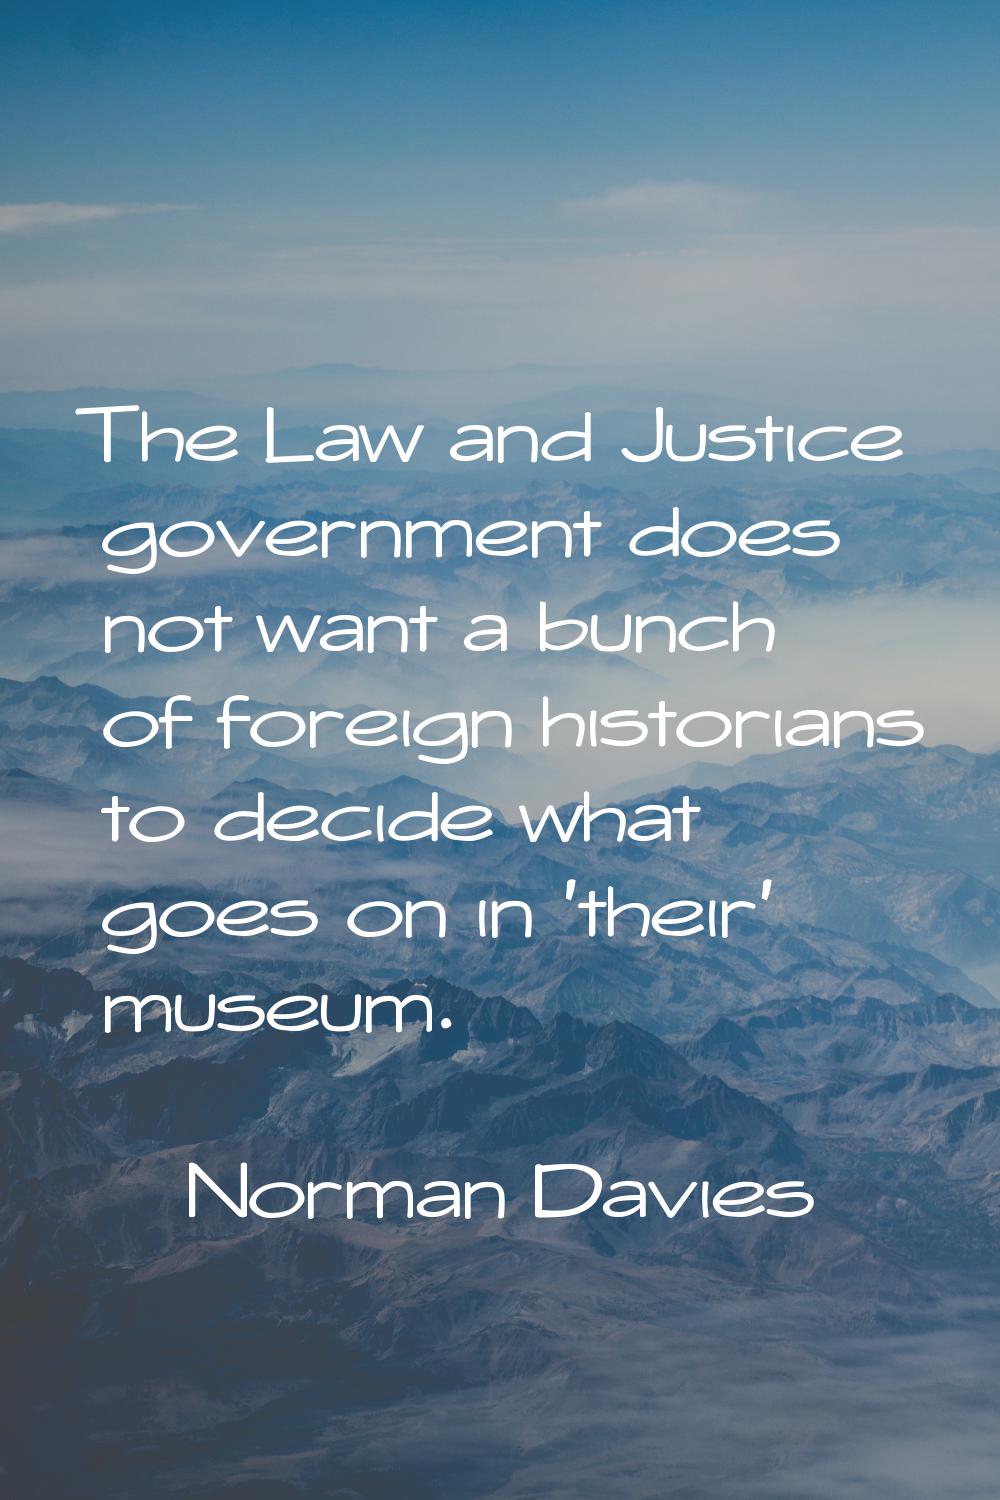 The Law and Justice government does not want a bunch of foreign historians to decide what goes on i